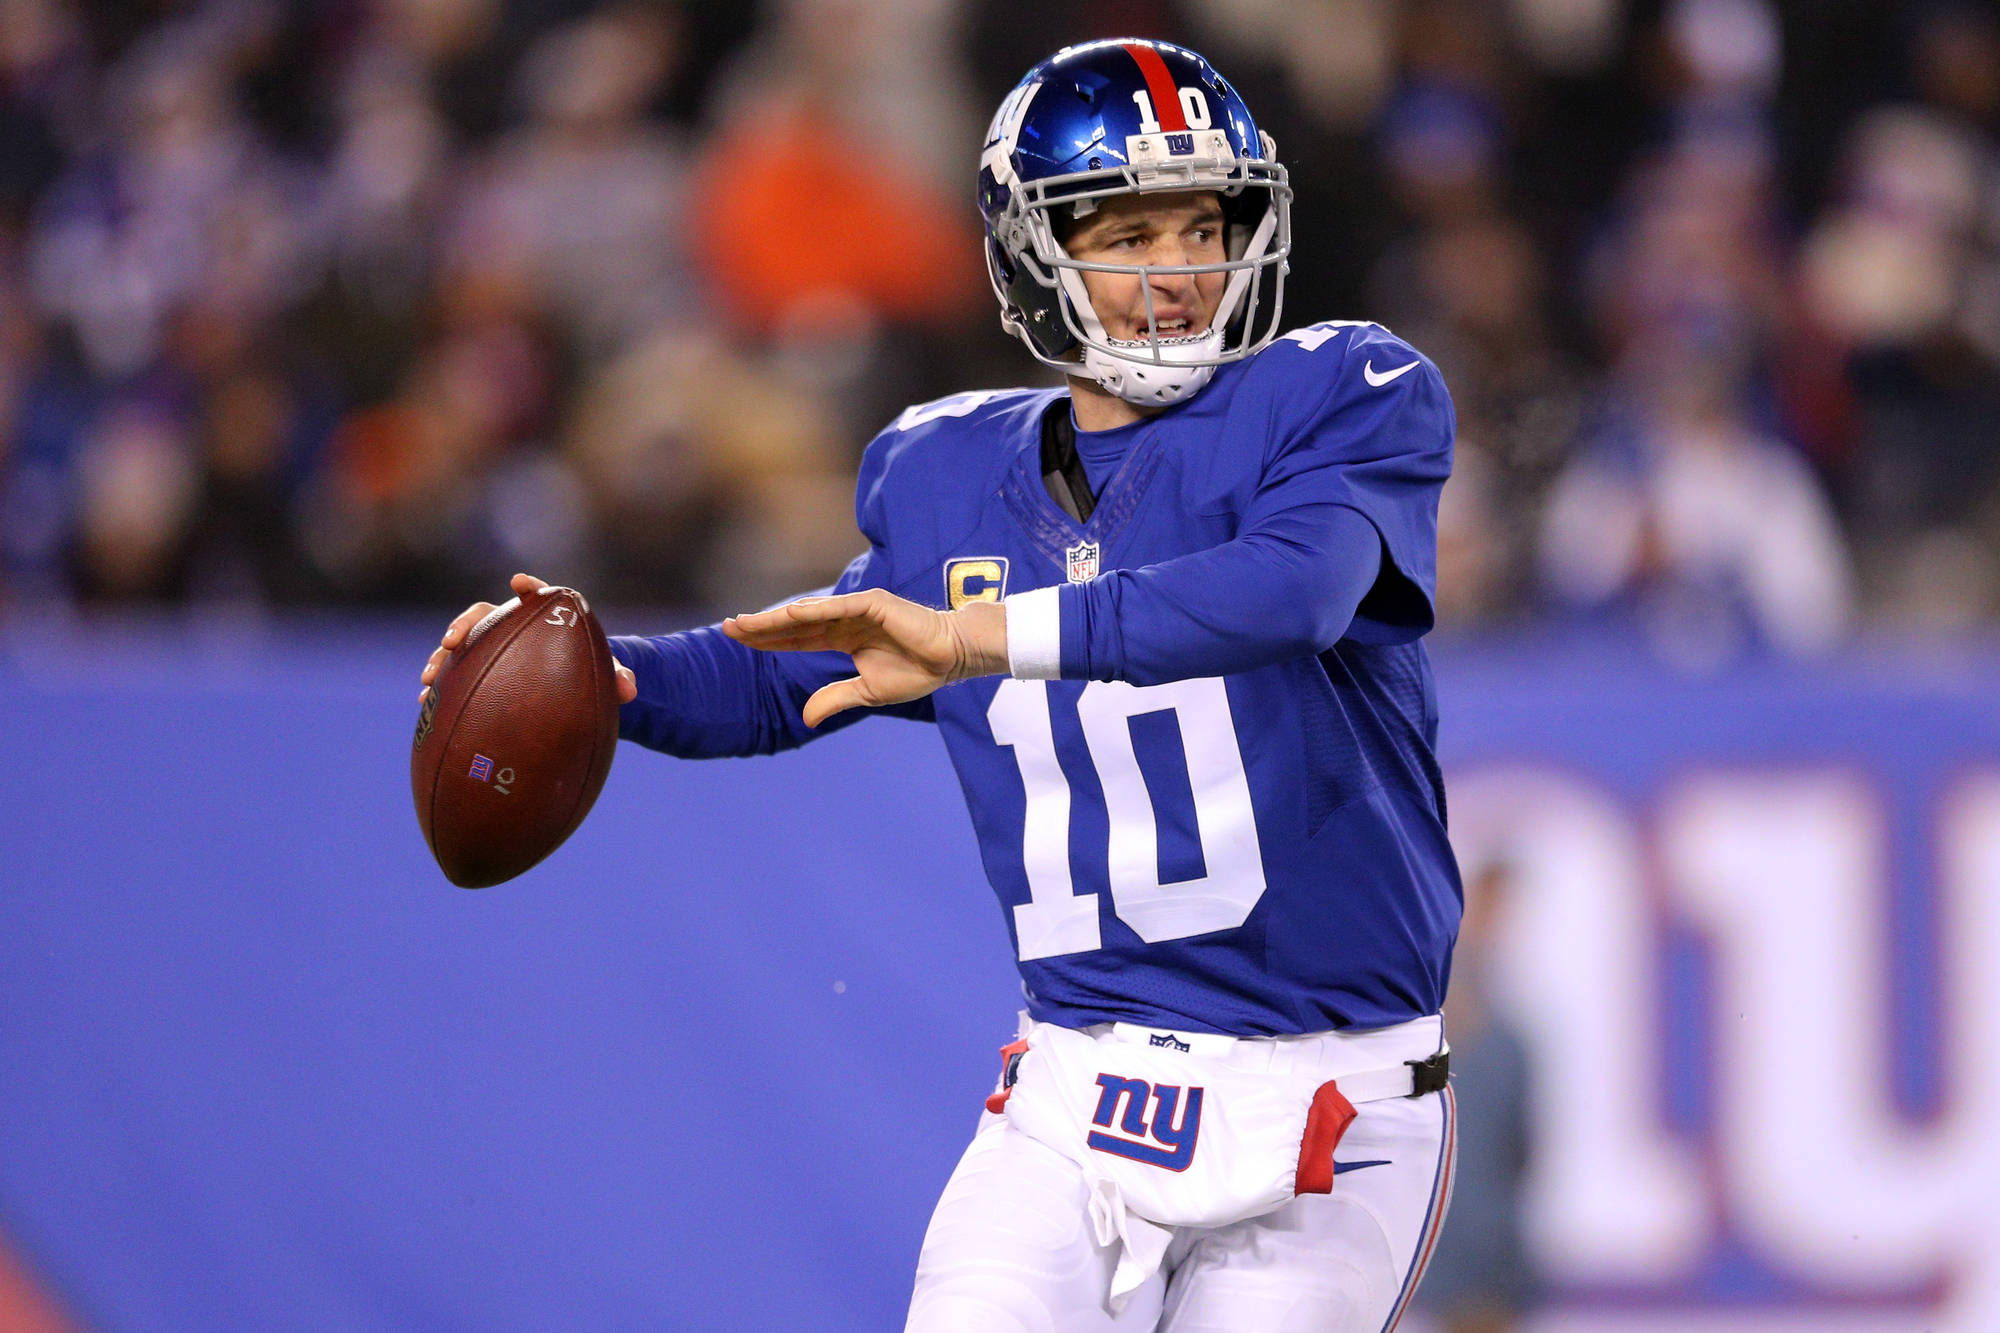 Is it Time to Stop Calling Eli Elite?